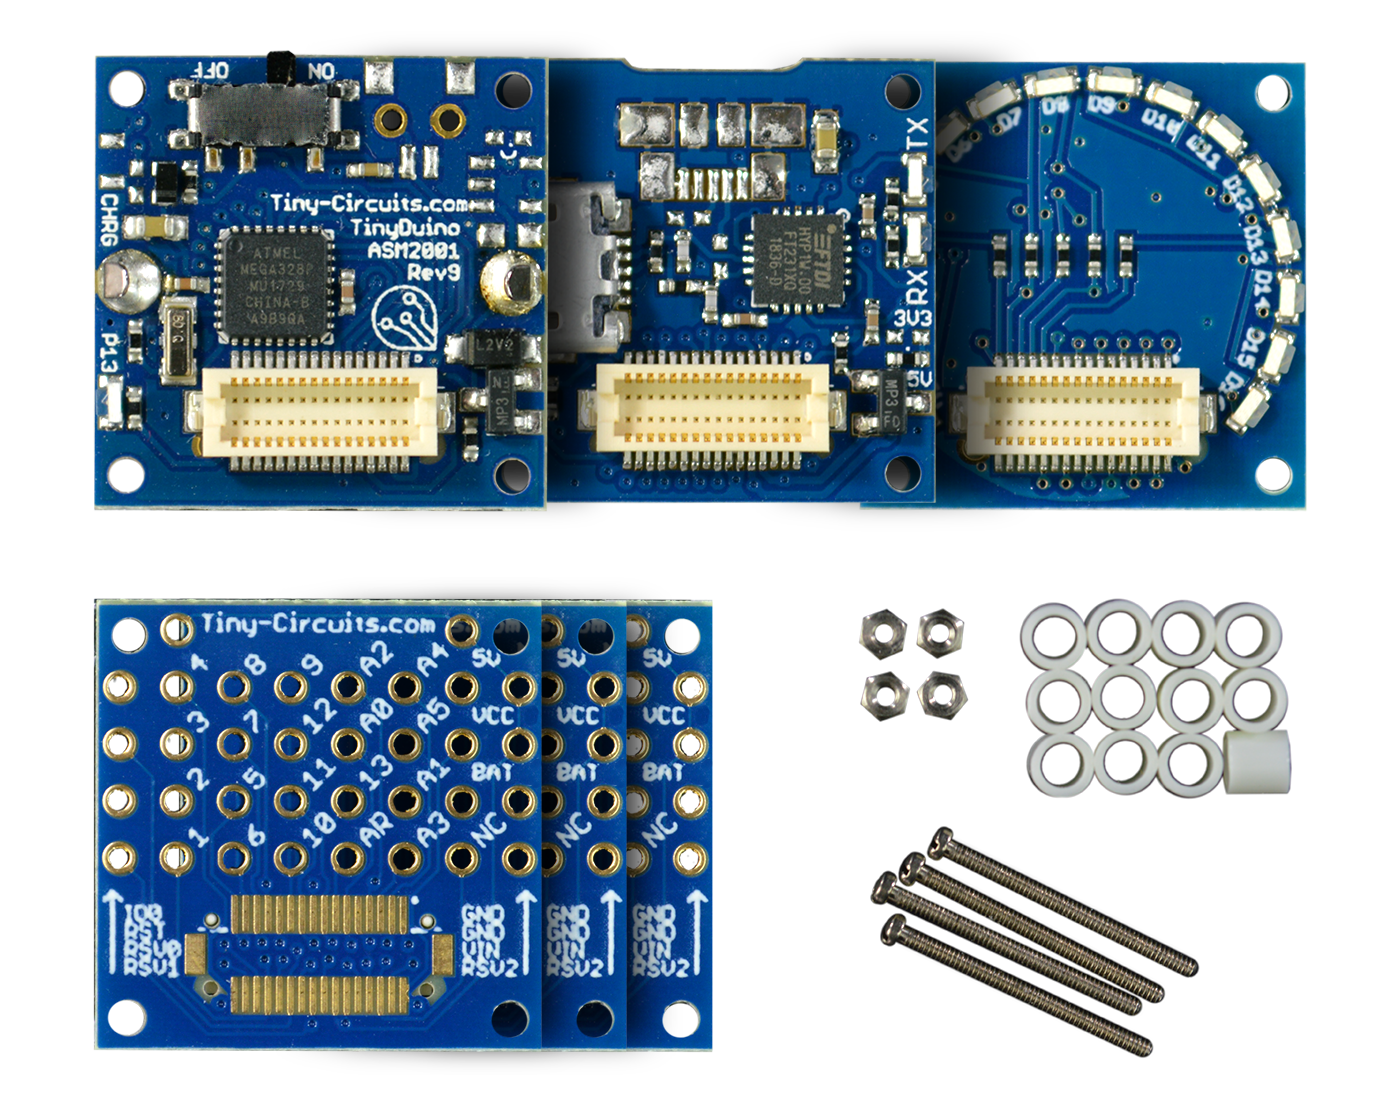 The Arduino Starter Kit (Low Cost)